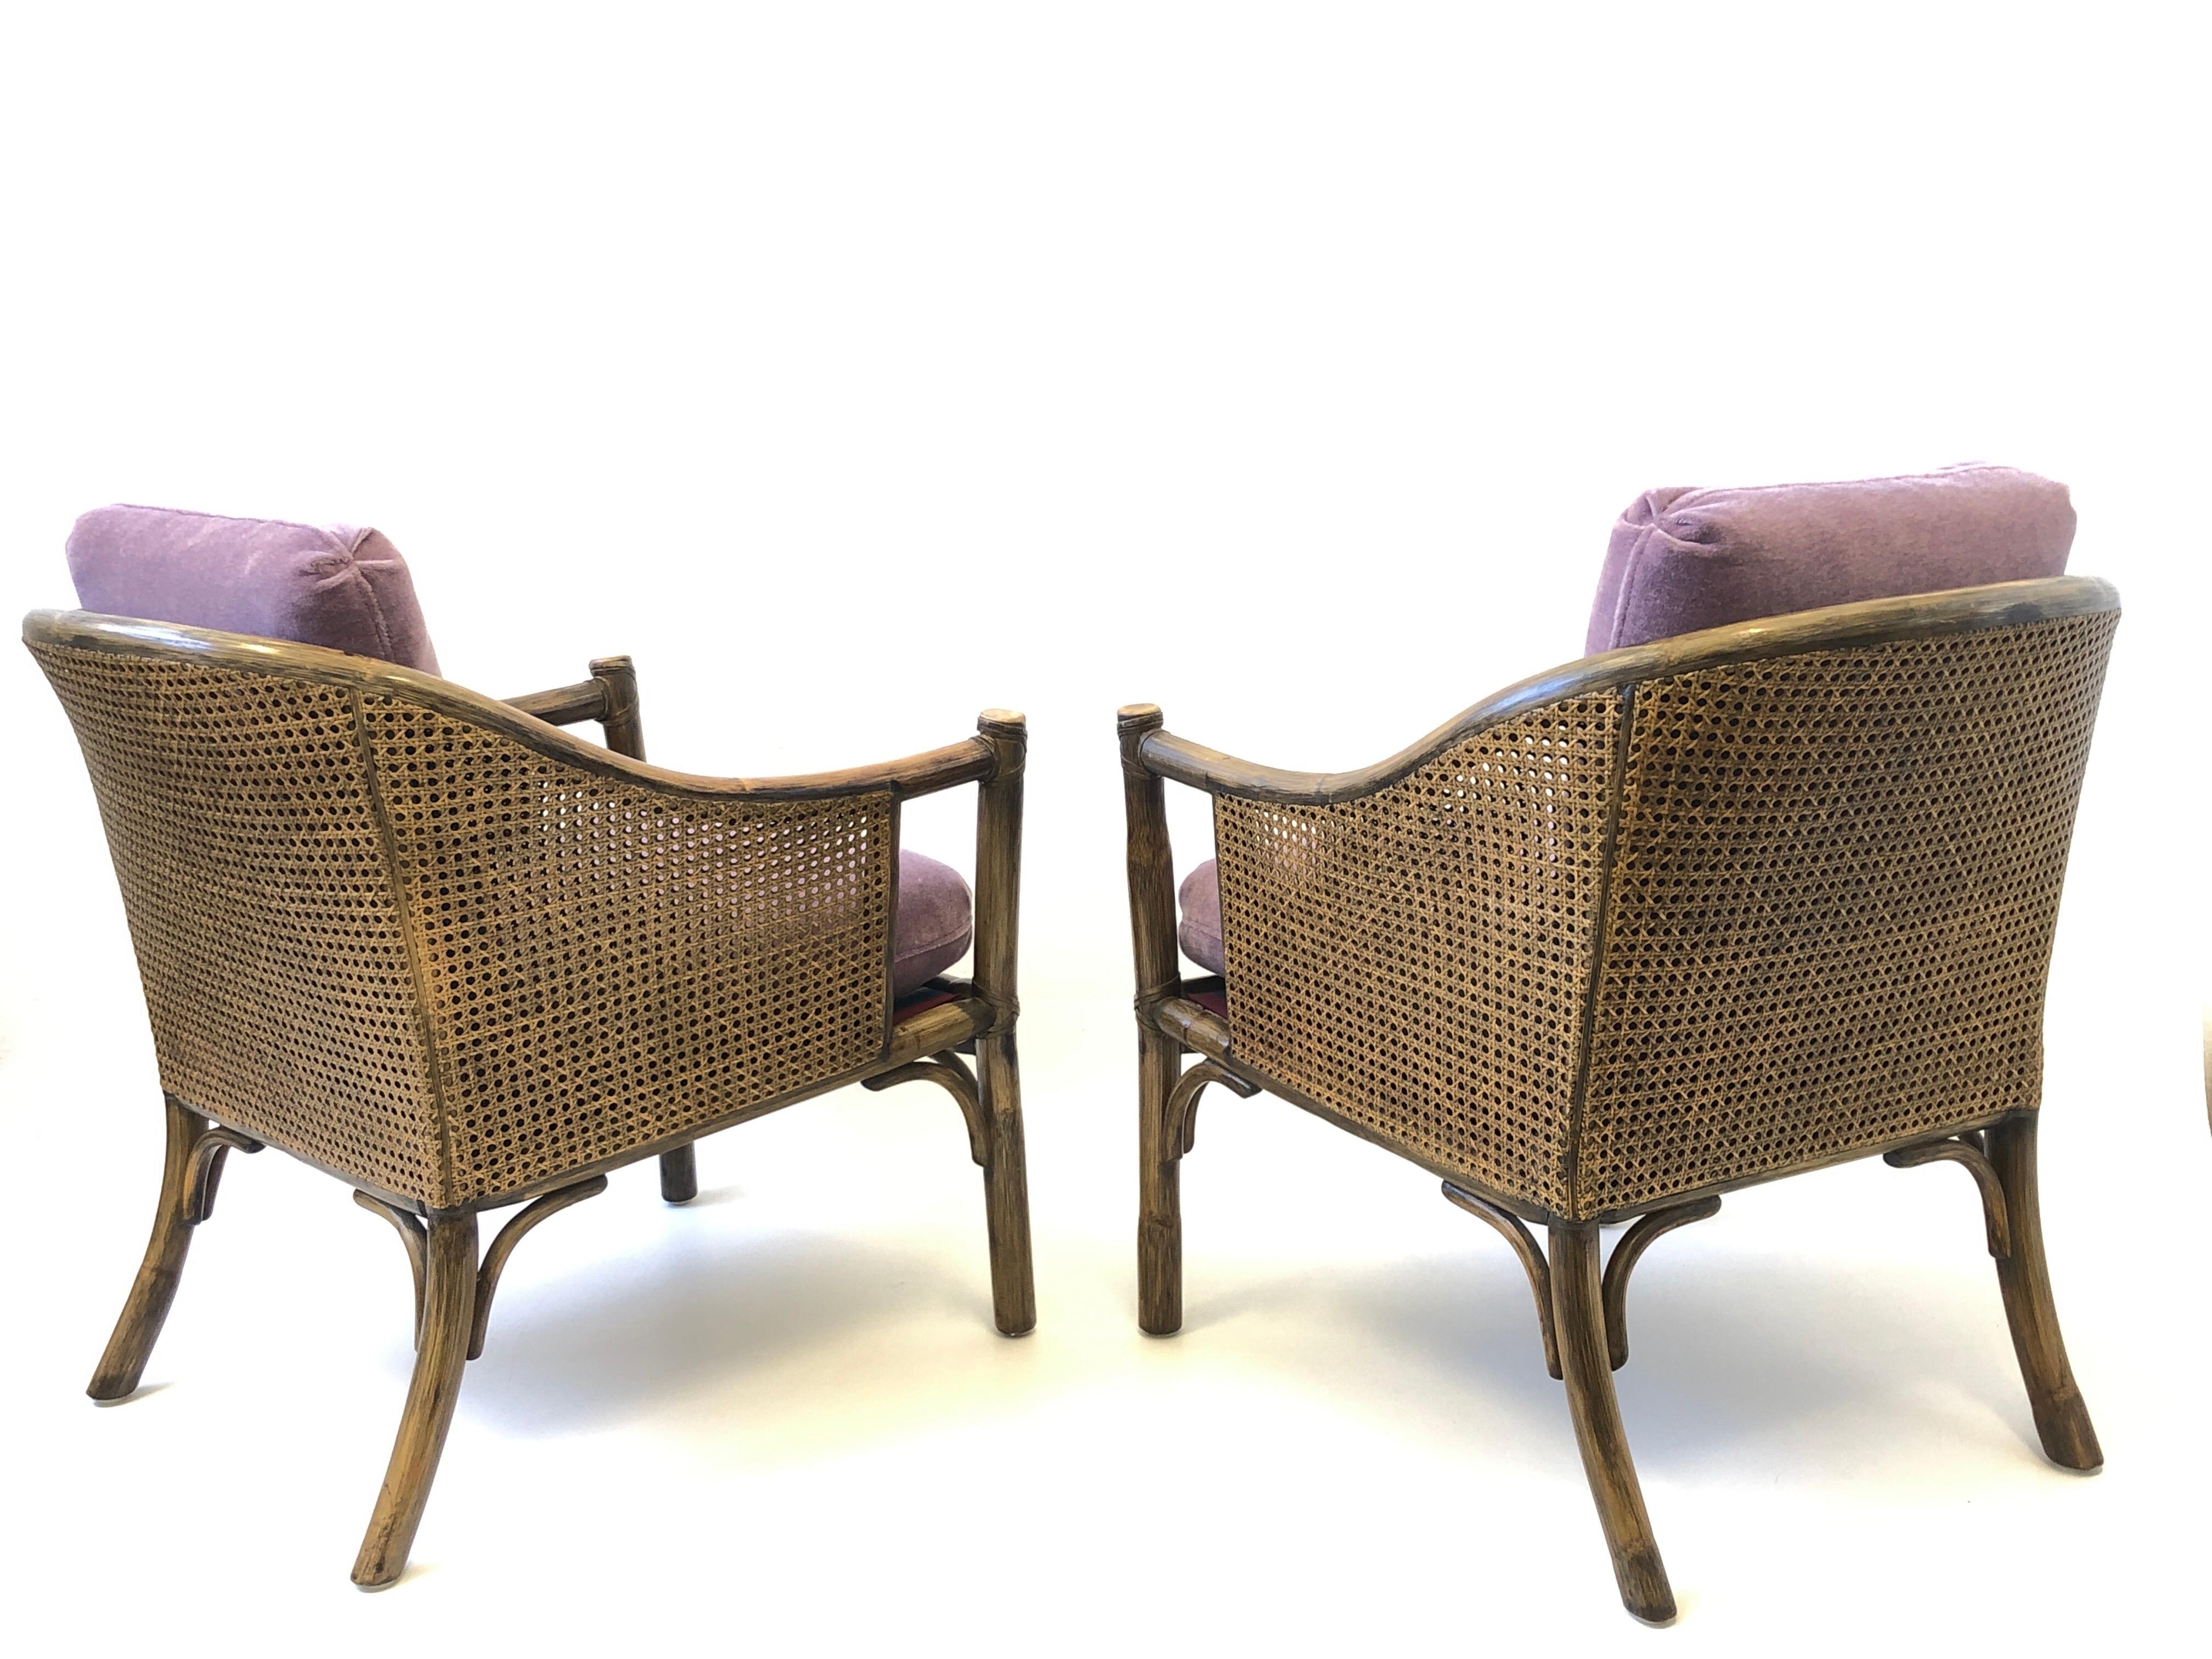 Late 20th Century Pair of Bamboo and Cane Lounge Chairs by McGuire